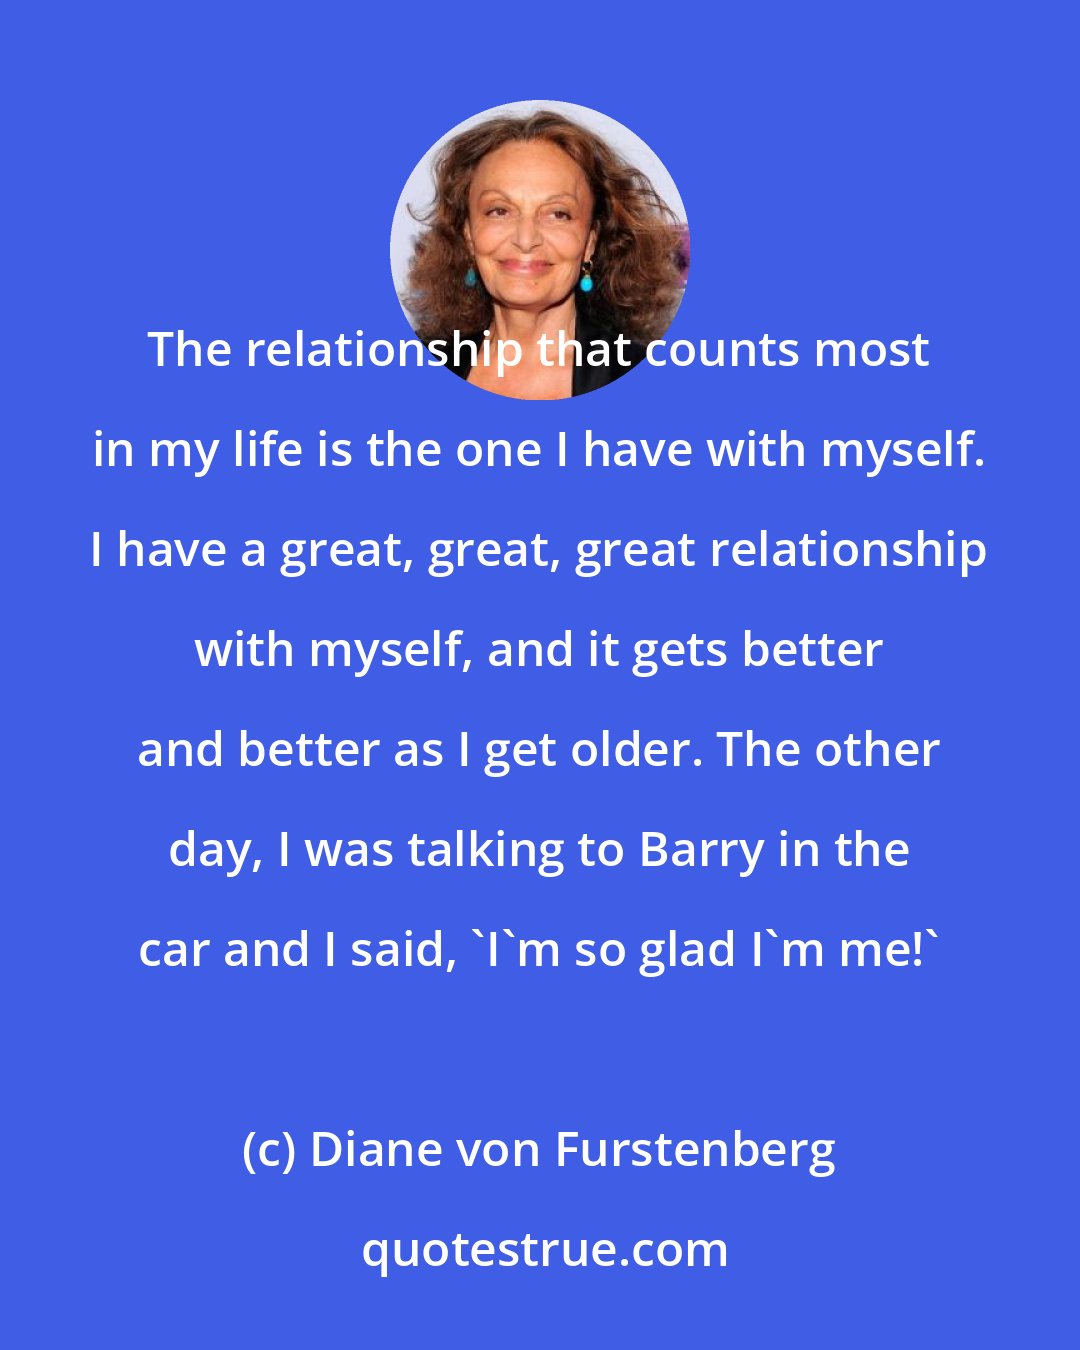 Diane von Furstenberg: The relationship that counts most in my life is the one I have with myself. I have a great, great, great relationship with myself, and it gets better and better as I get older. The other day, I was talking to Barry in the car and I said, 'I'm so glad I'm me!'